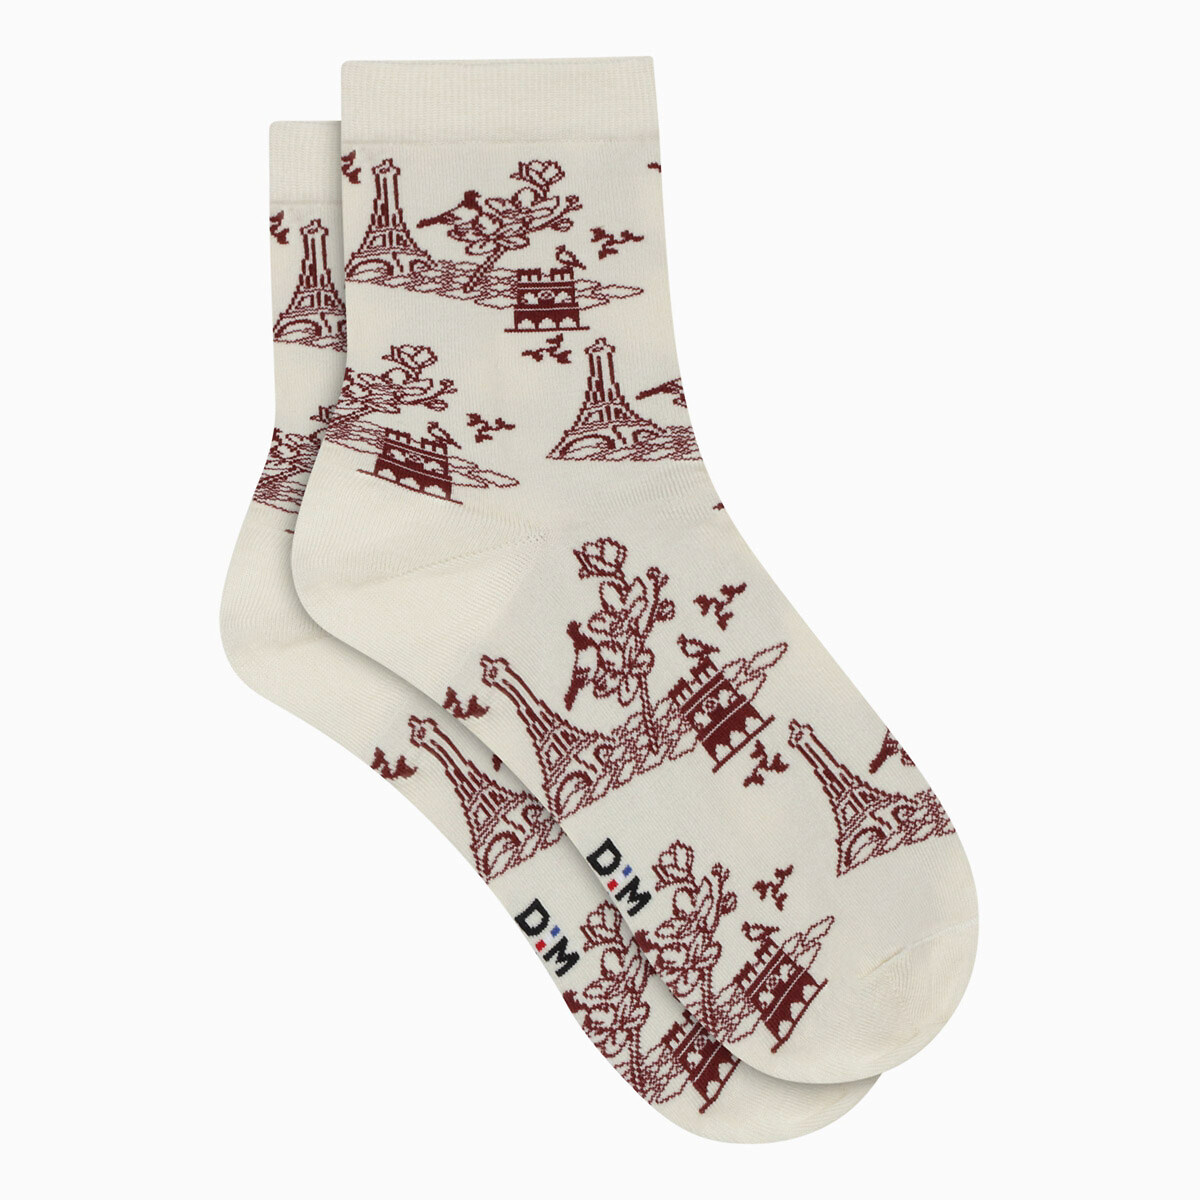 Image of Pair of Madame Toile de Jouy Socks in Cotton Mix